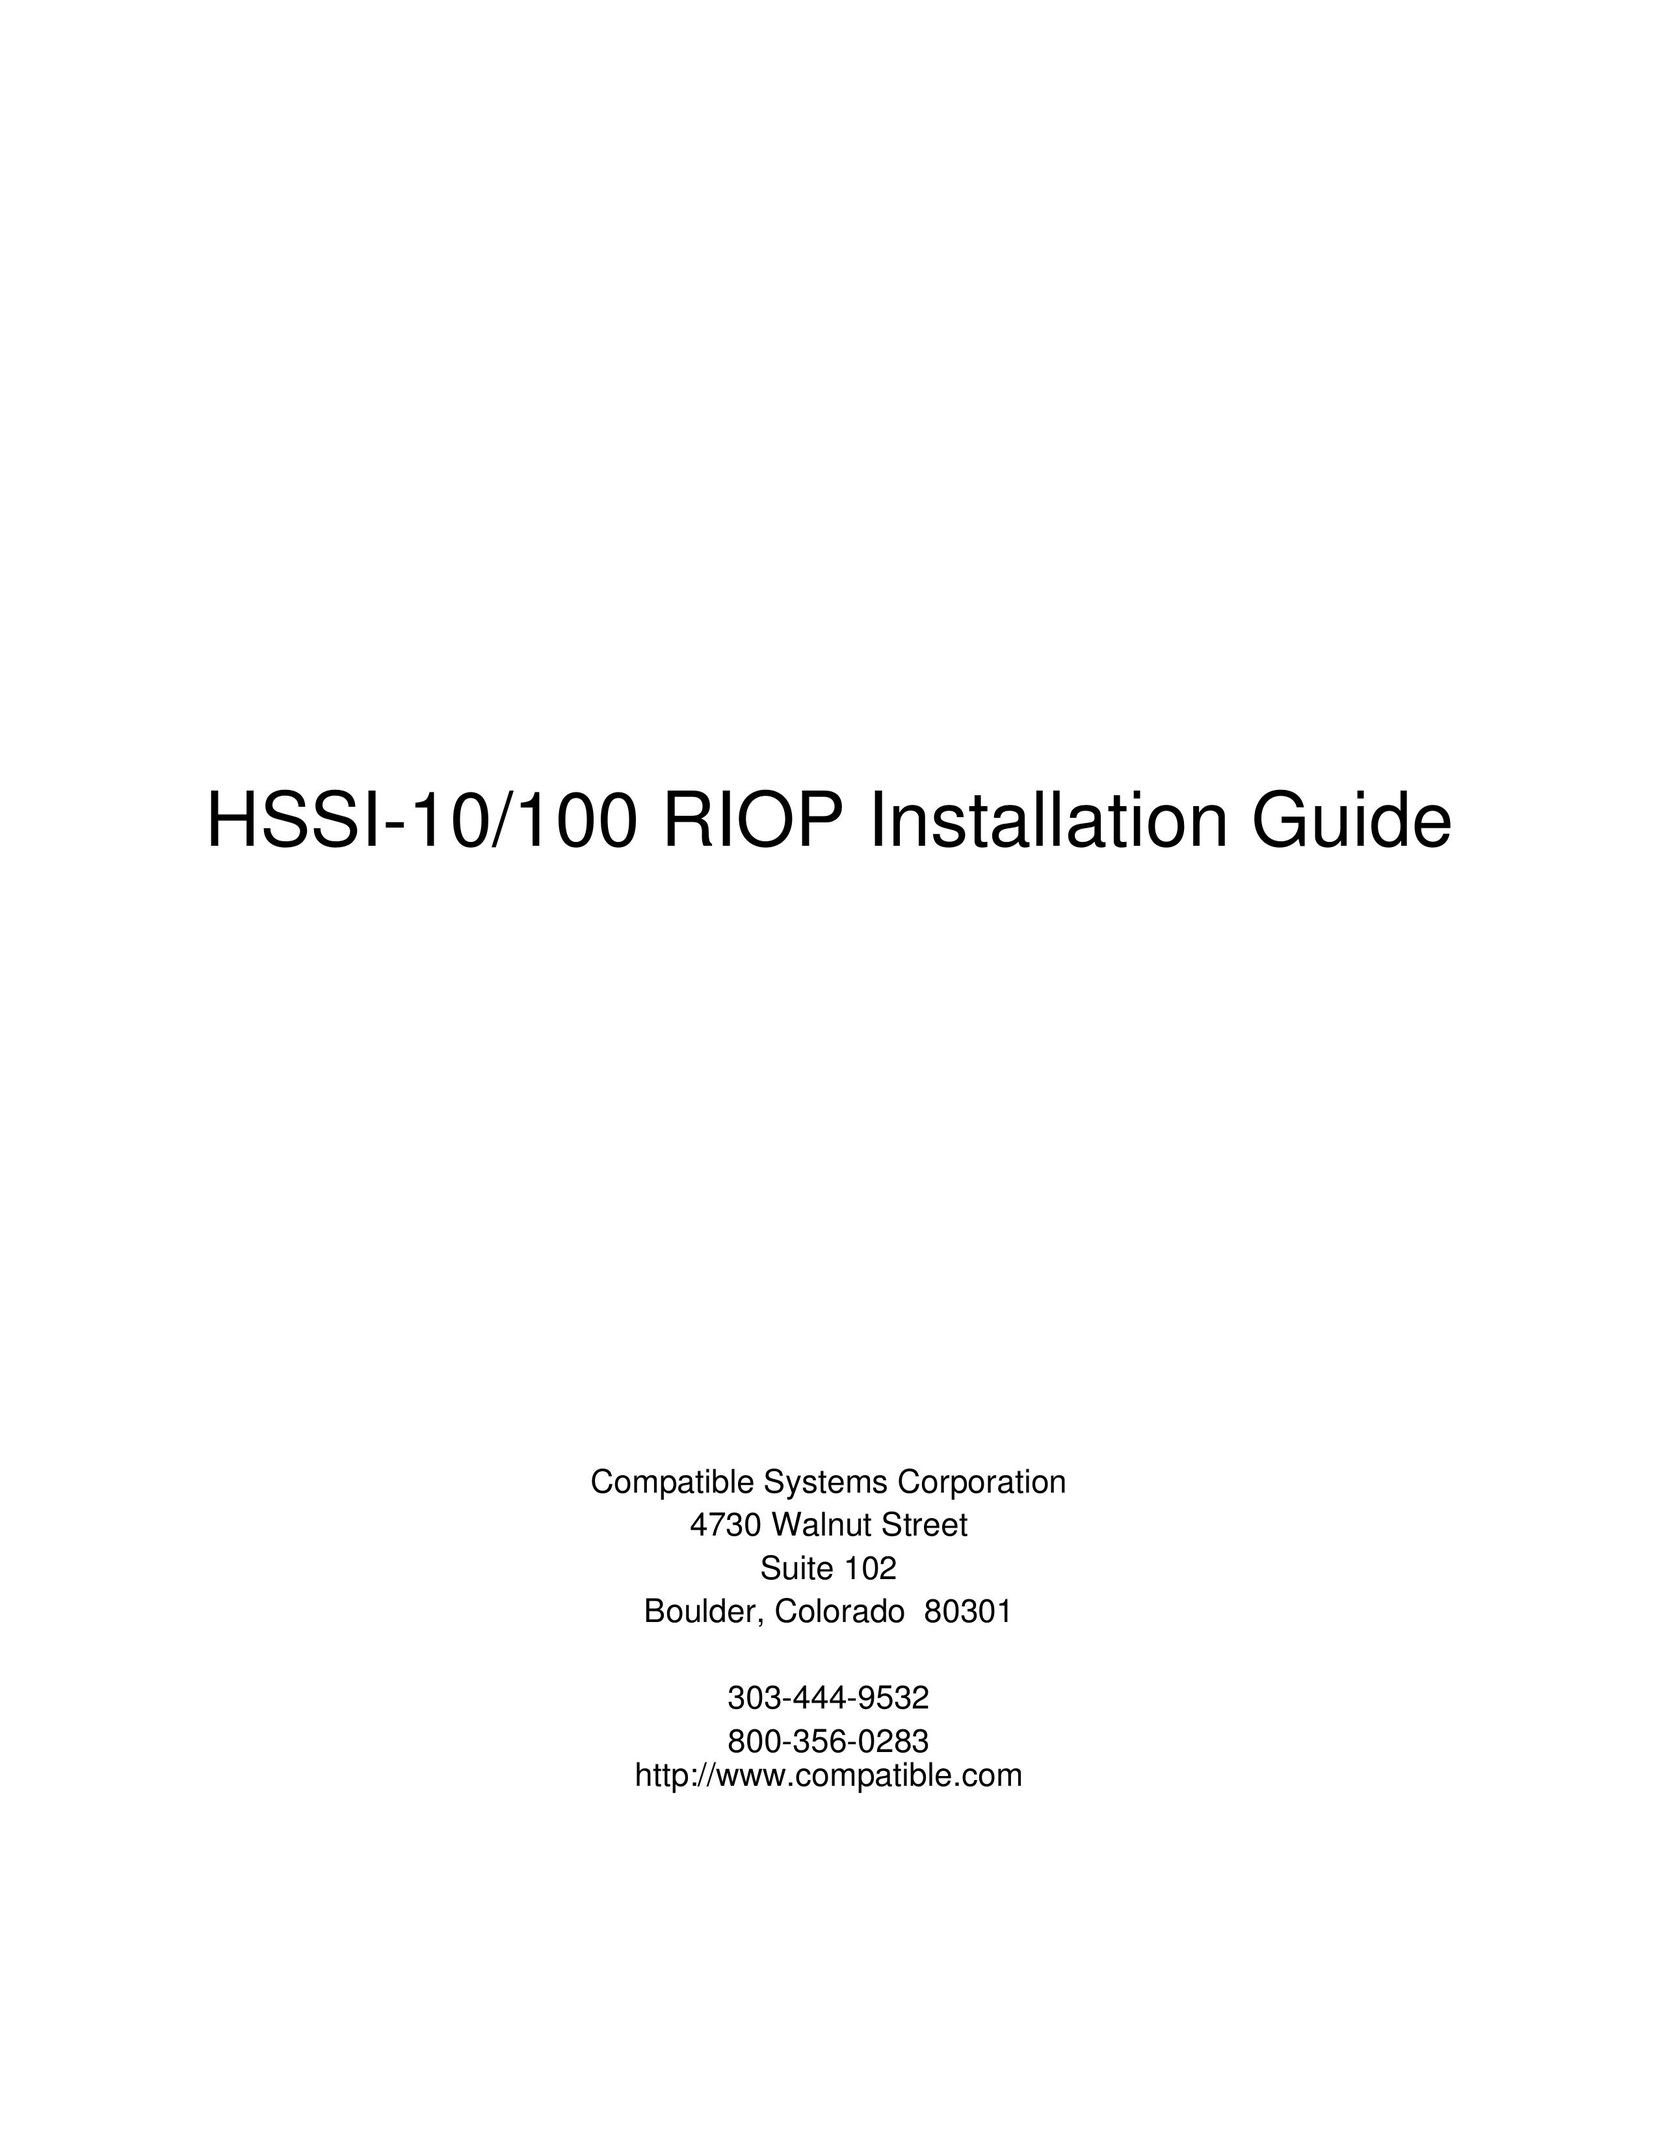 Compatible Systems HSSI-10/100 Network Router User Manual